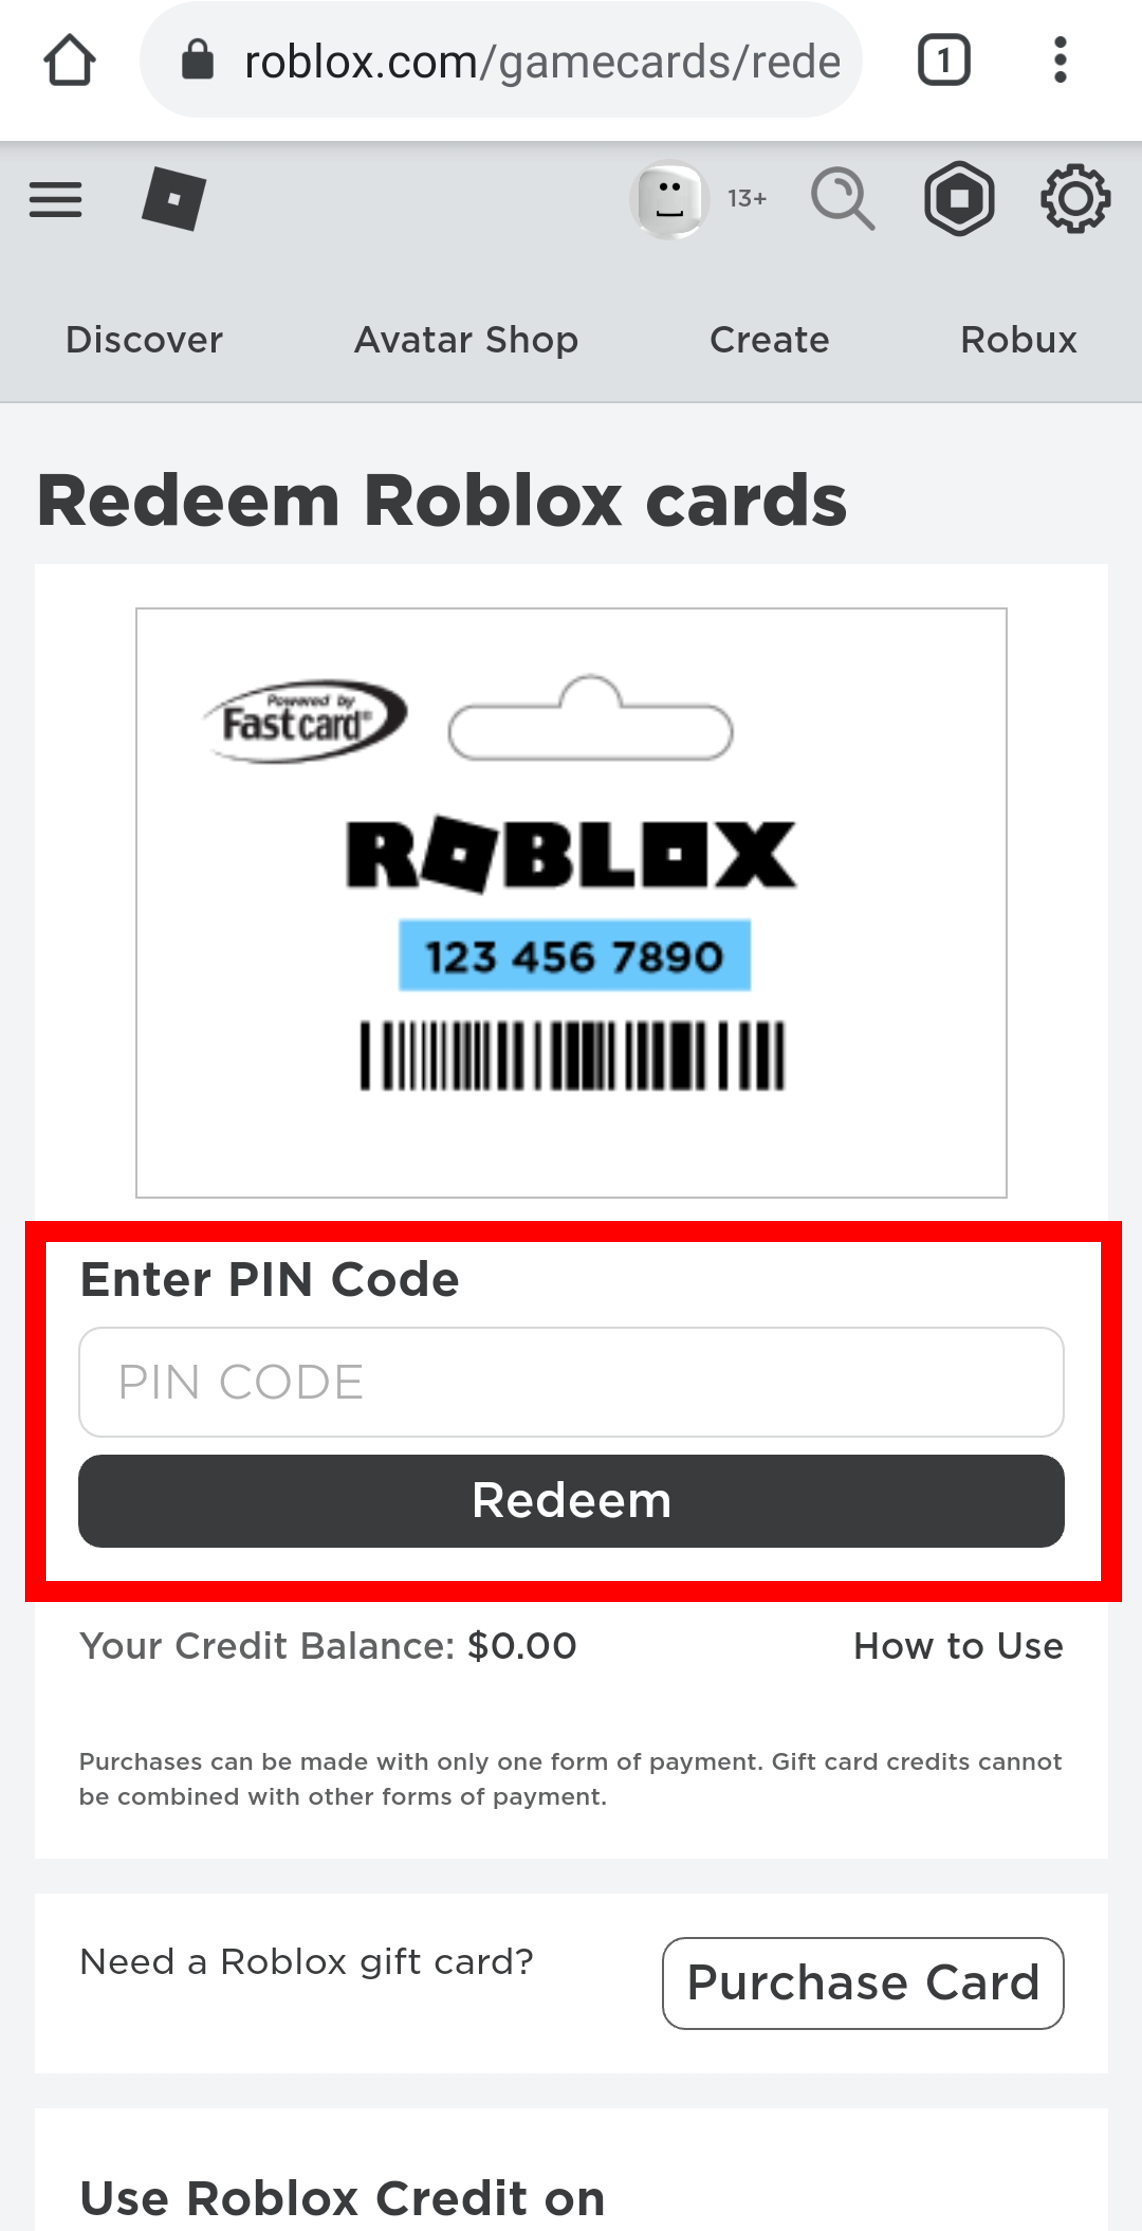 roblox/game cards/redeem